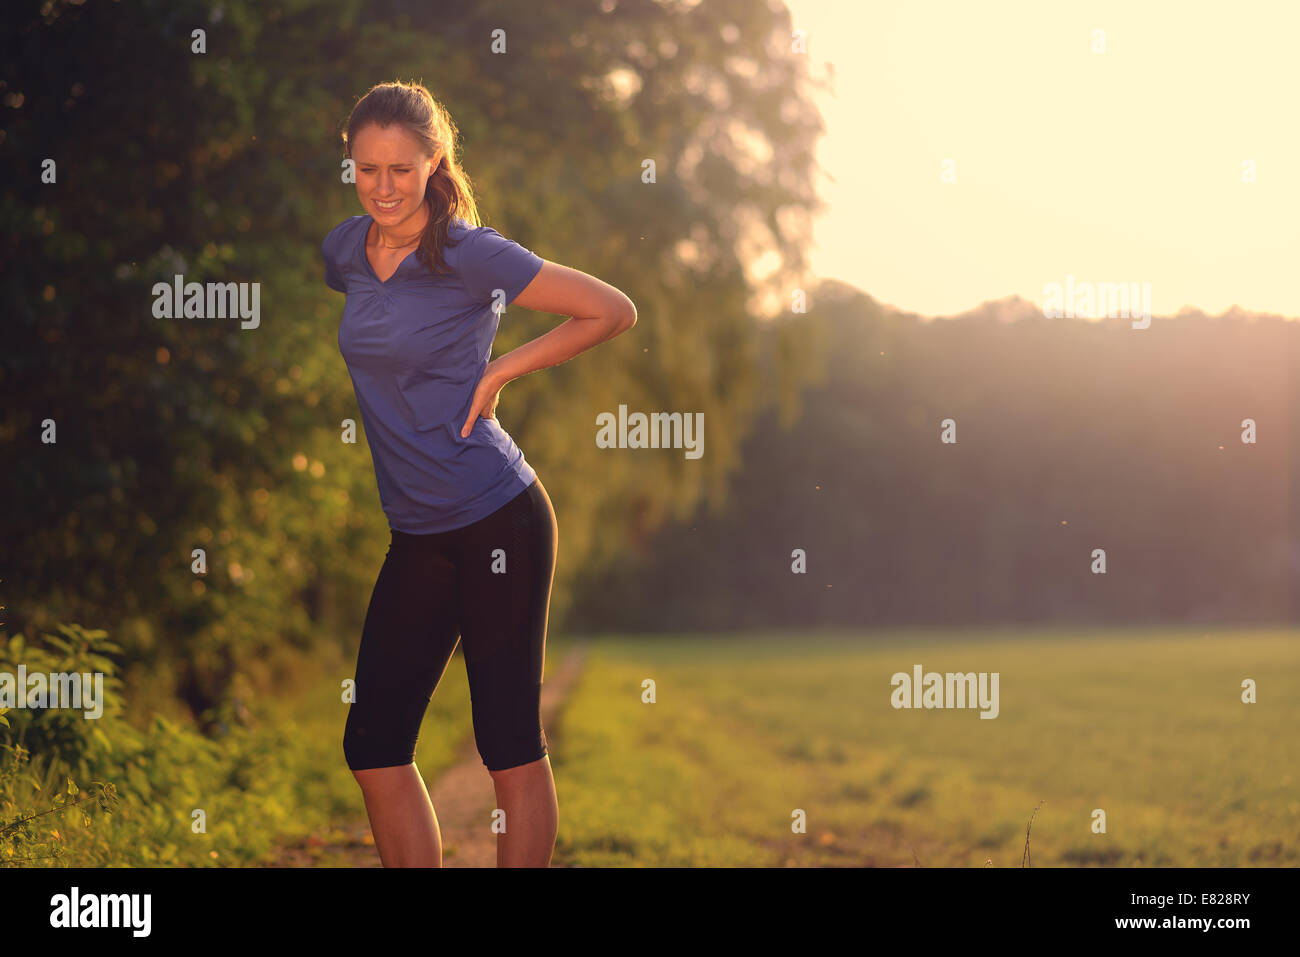 Woman athlete pausing to relieve her back pain holding her hand to her lower back with a grimace while out training Stock Photo